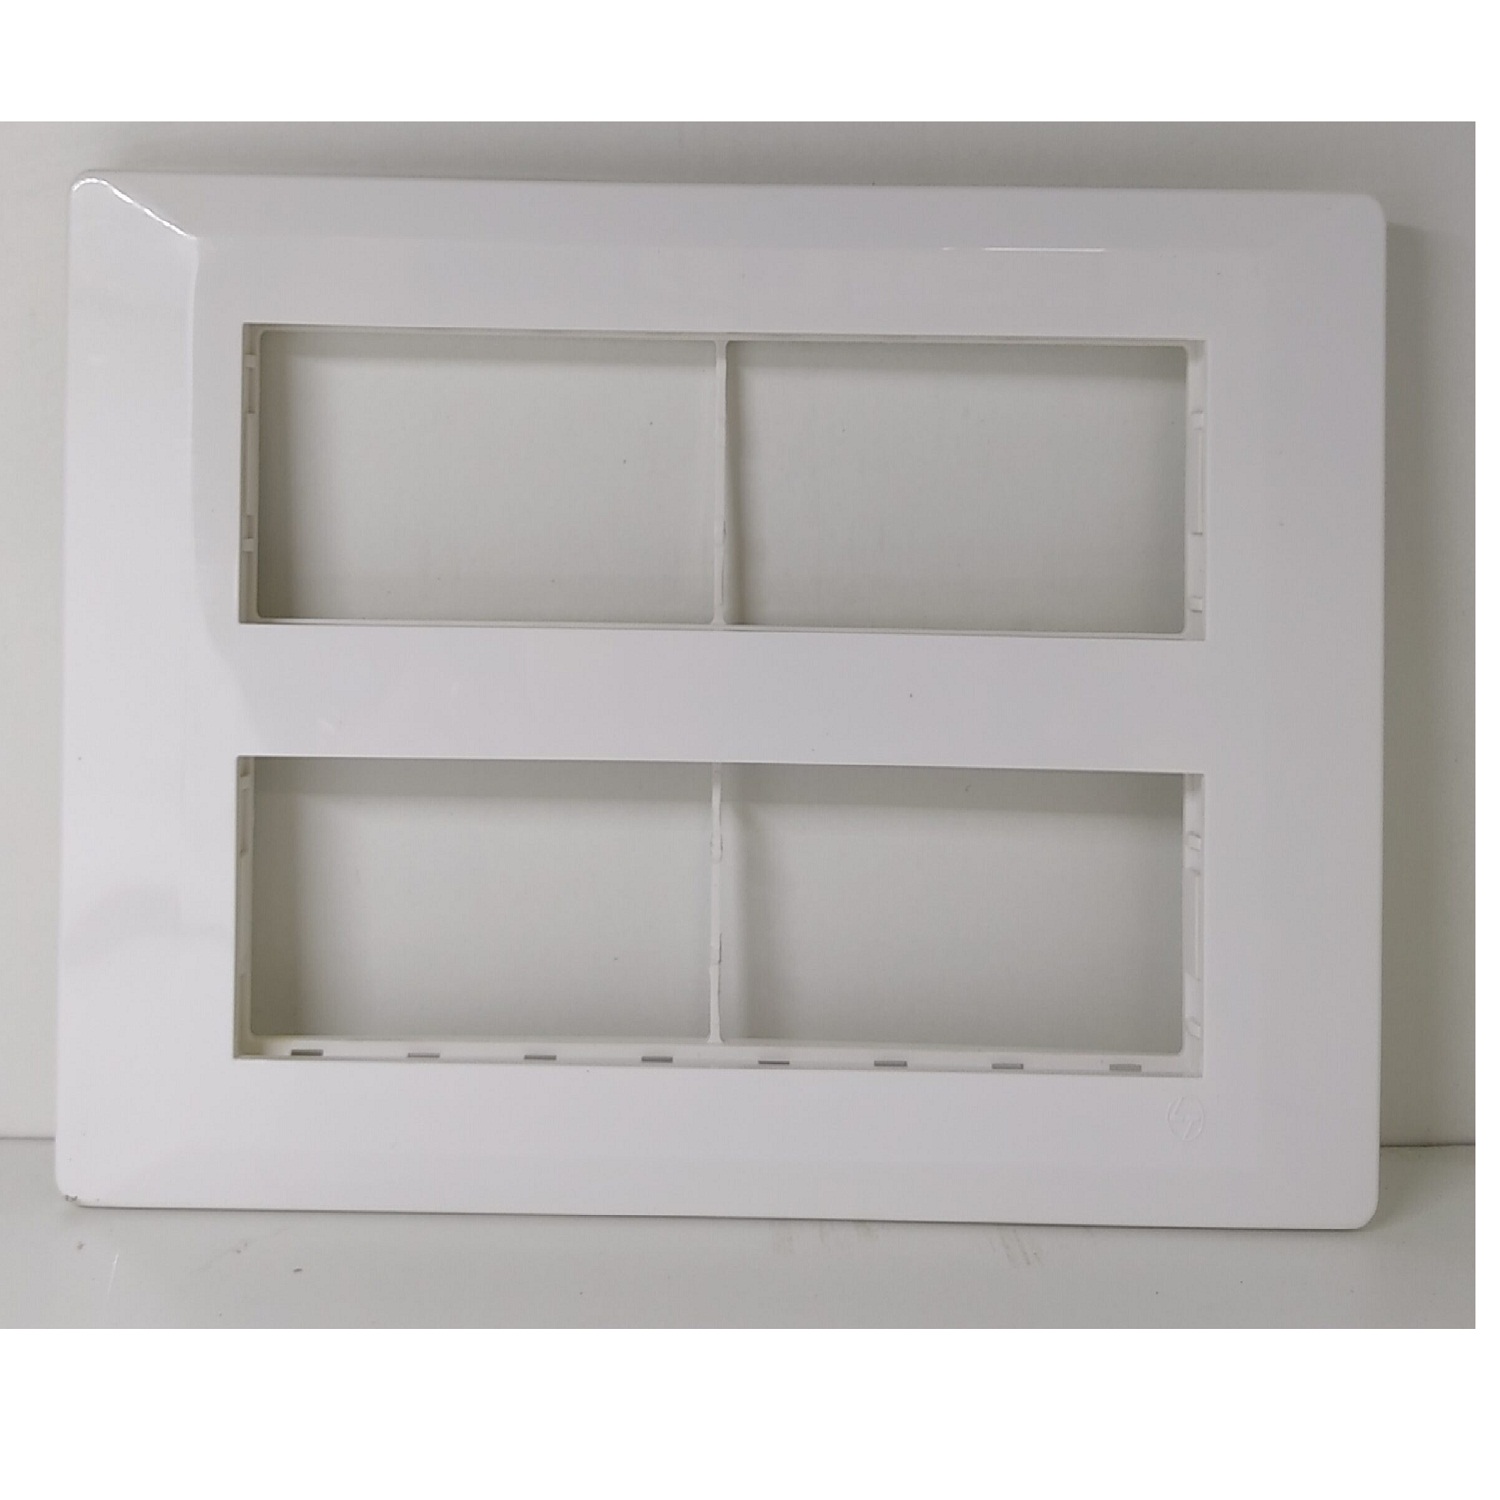 LT Entice  16 Module (Regular) Cover Plate with Base Frame - White